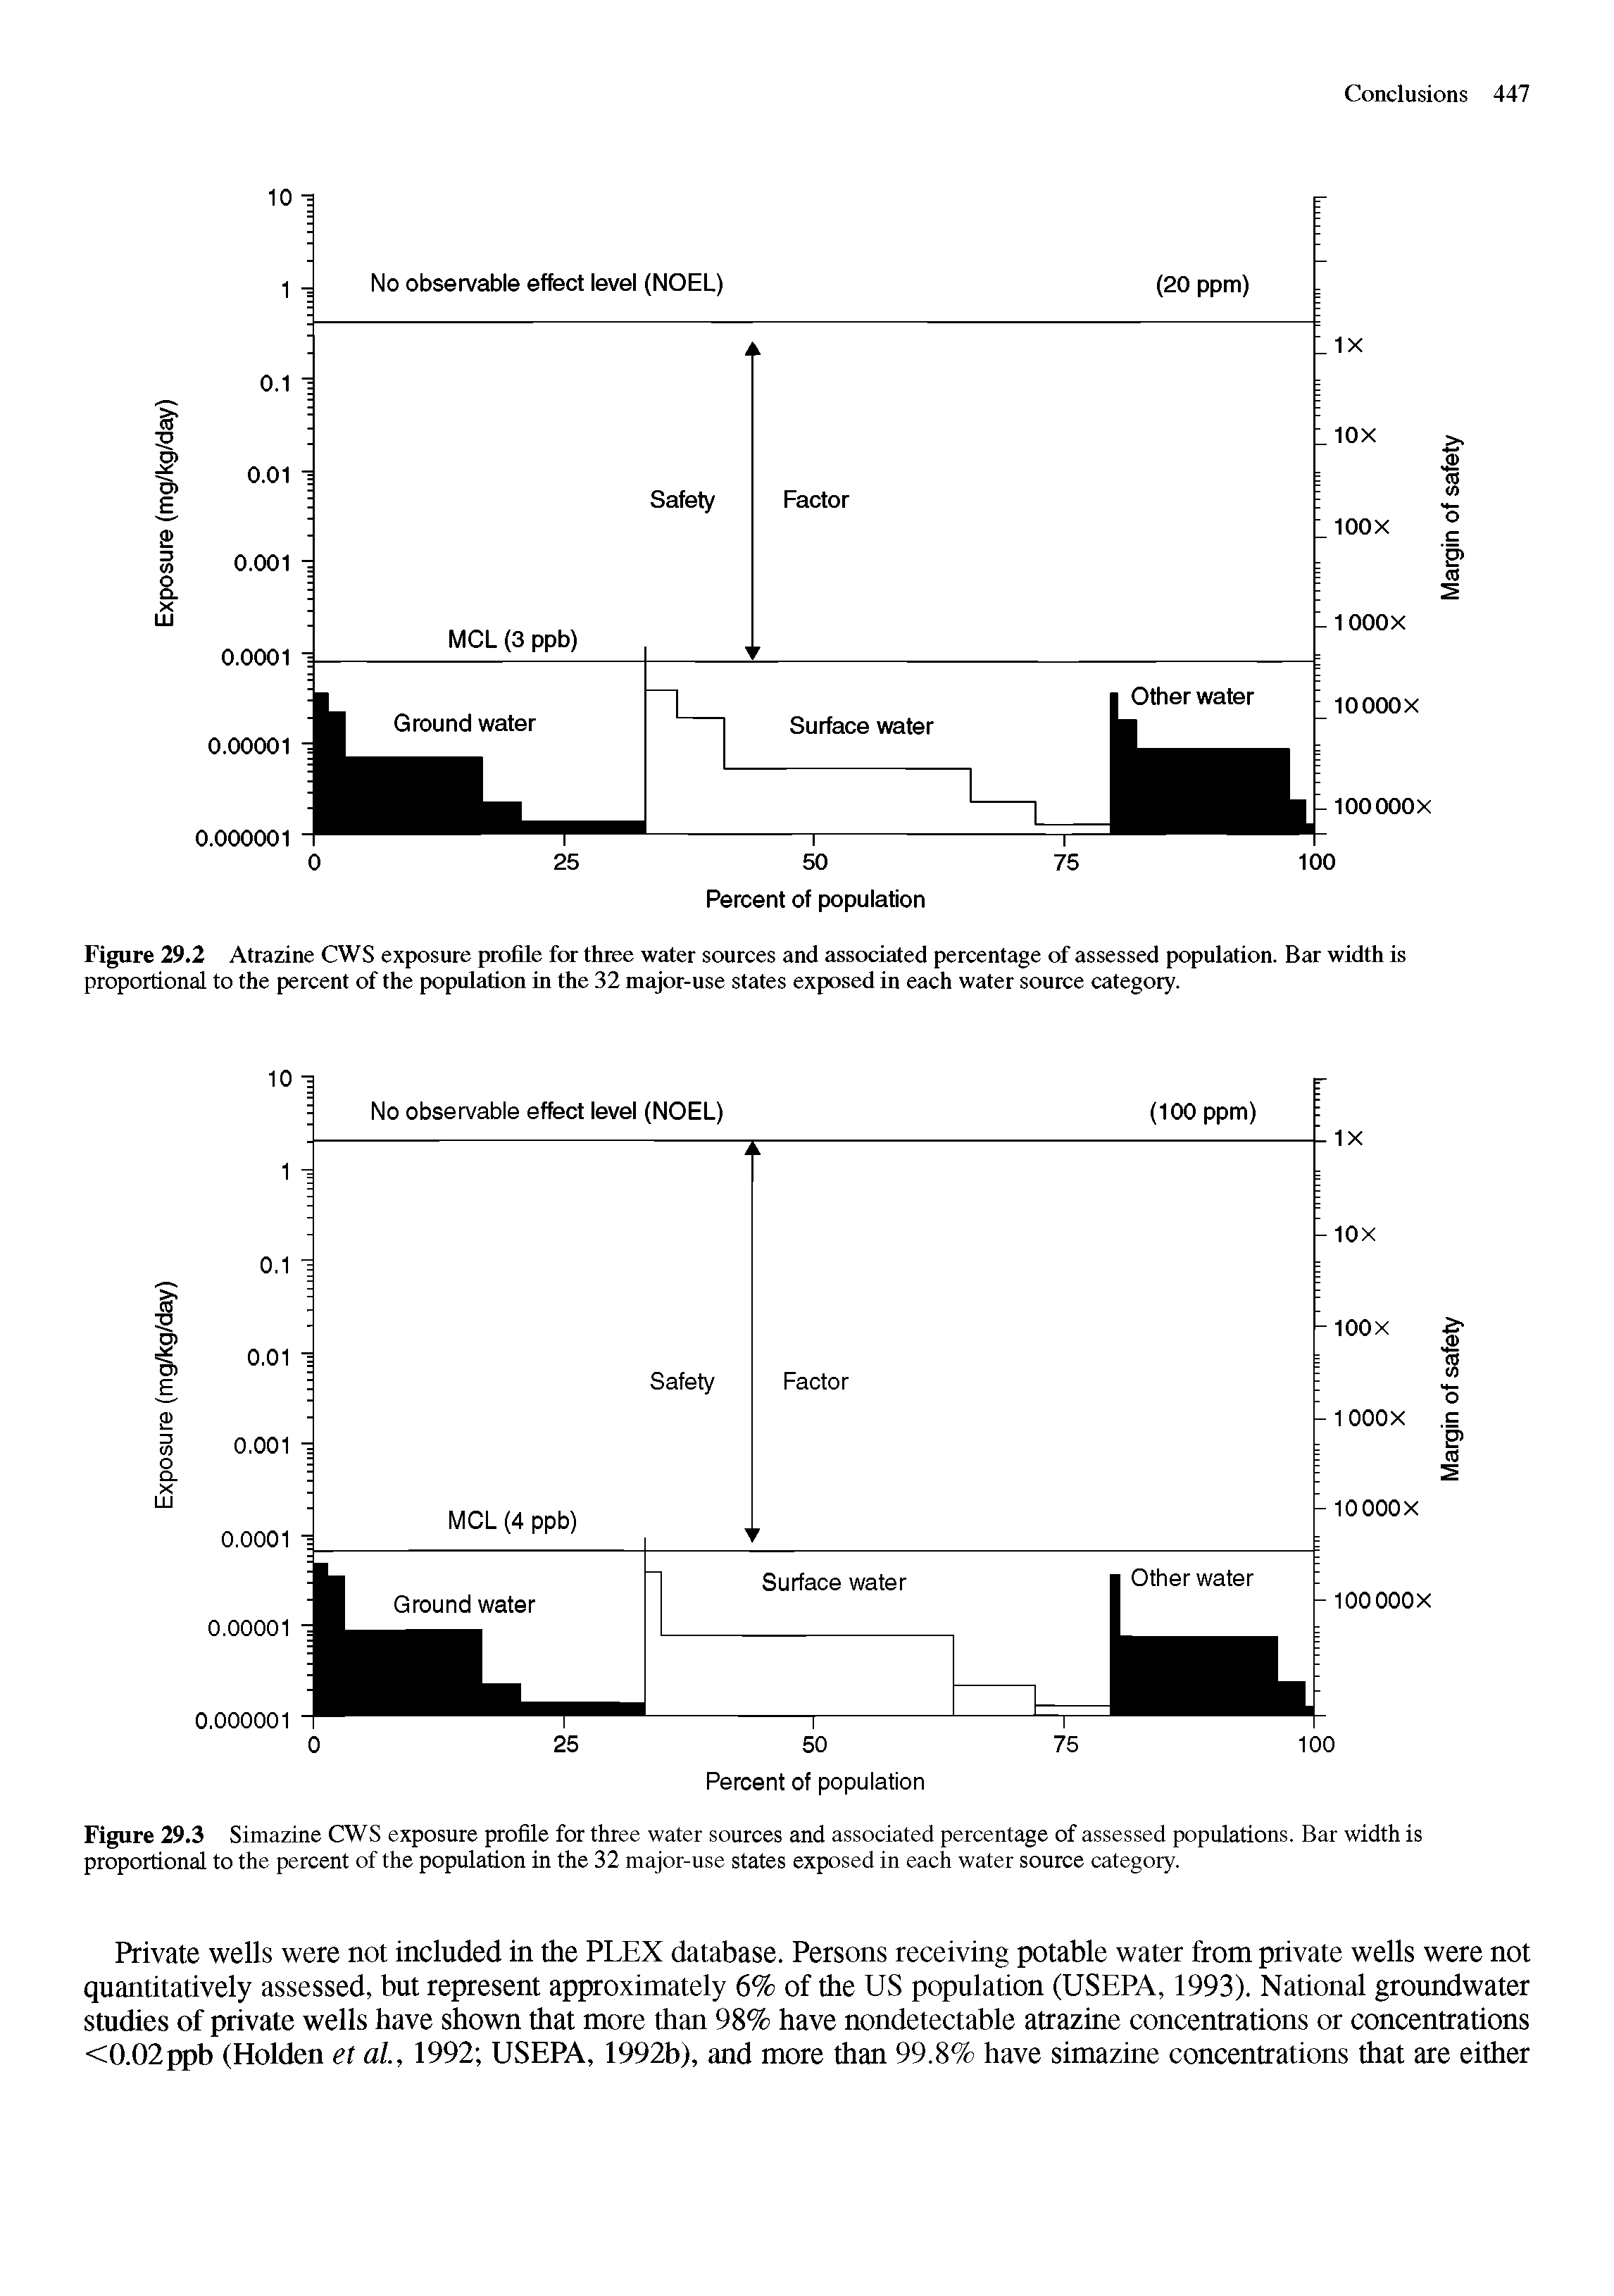 Figure 29.2 Atrazine CWS exposure profile for three water sources and associated percentage of assessed population. Bar width is proportional to the percent of the population in the 32 major-use states exposed in each water source category.